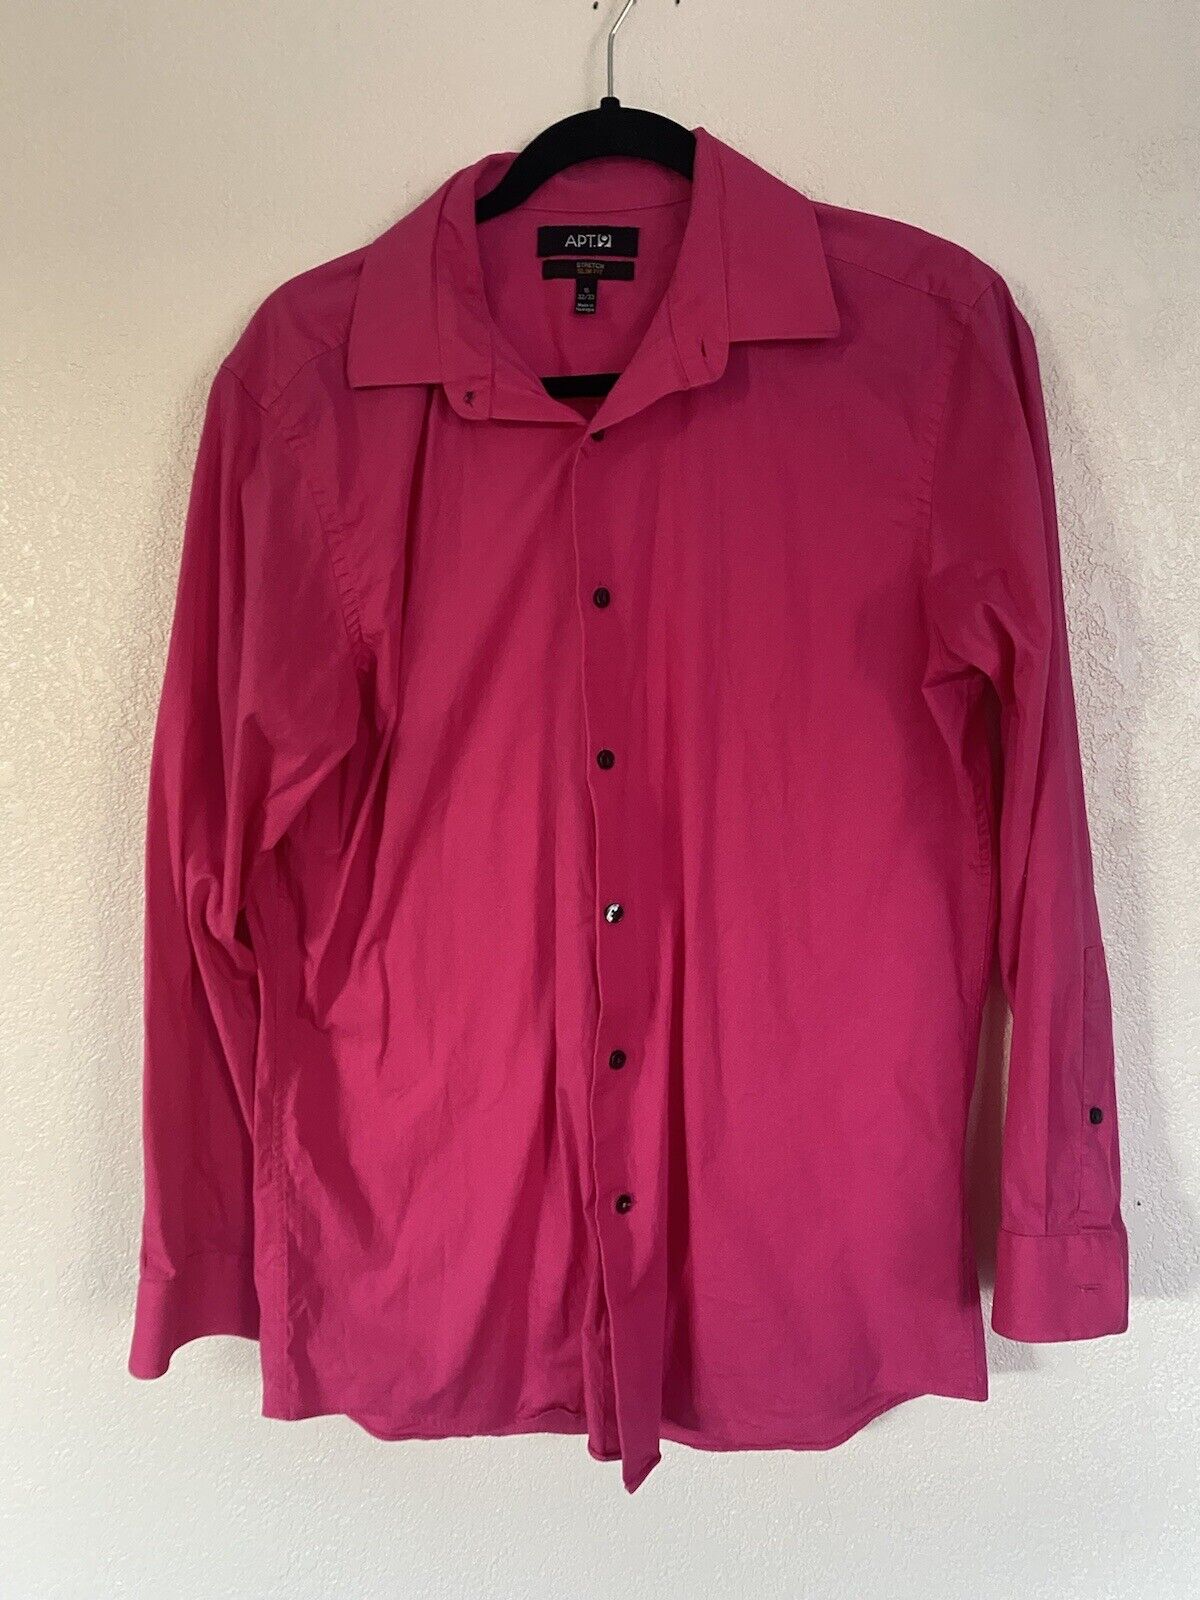 Bright Pink Button Down - Apt 9 - Women's Large # 2227